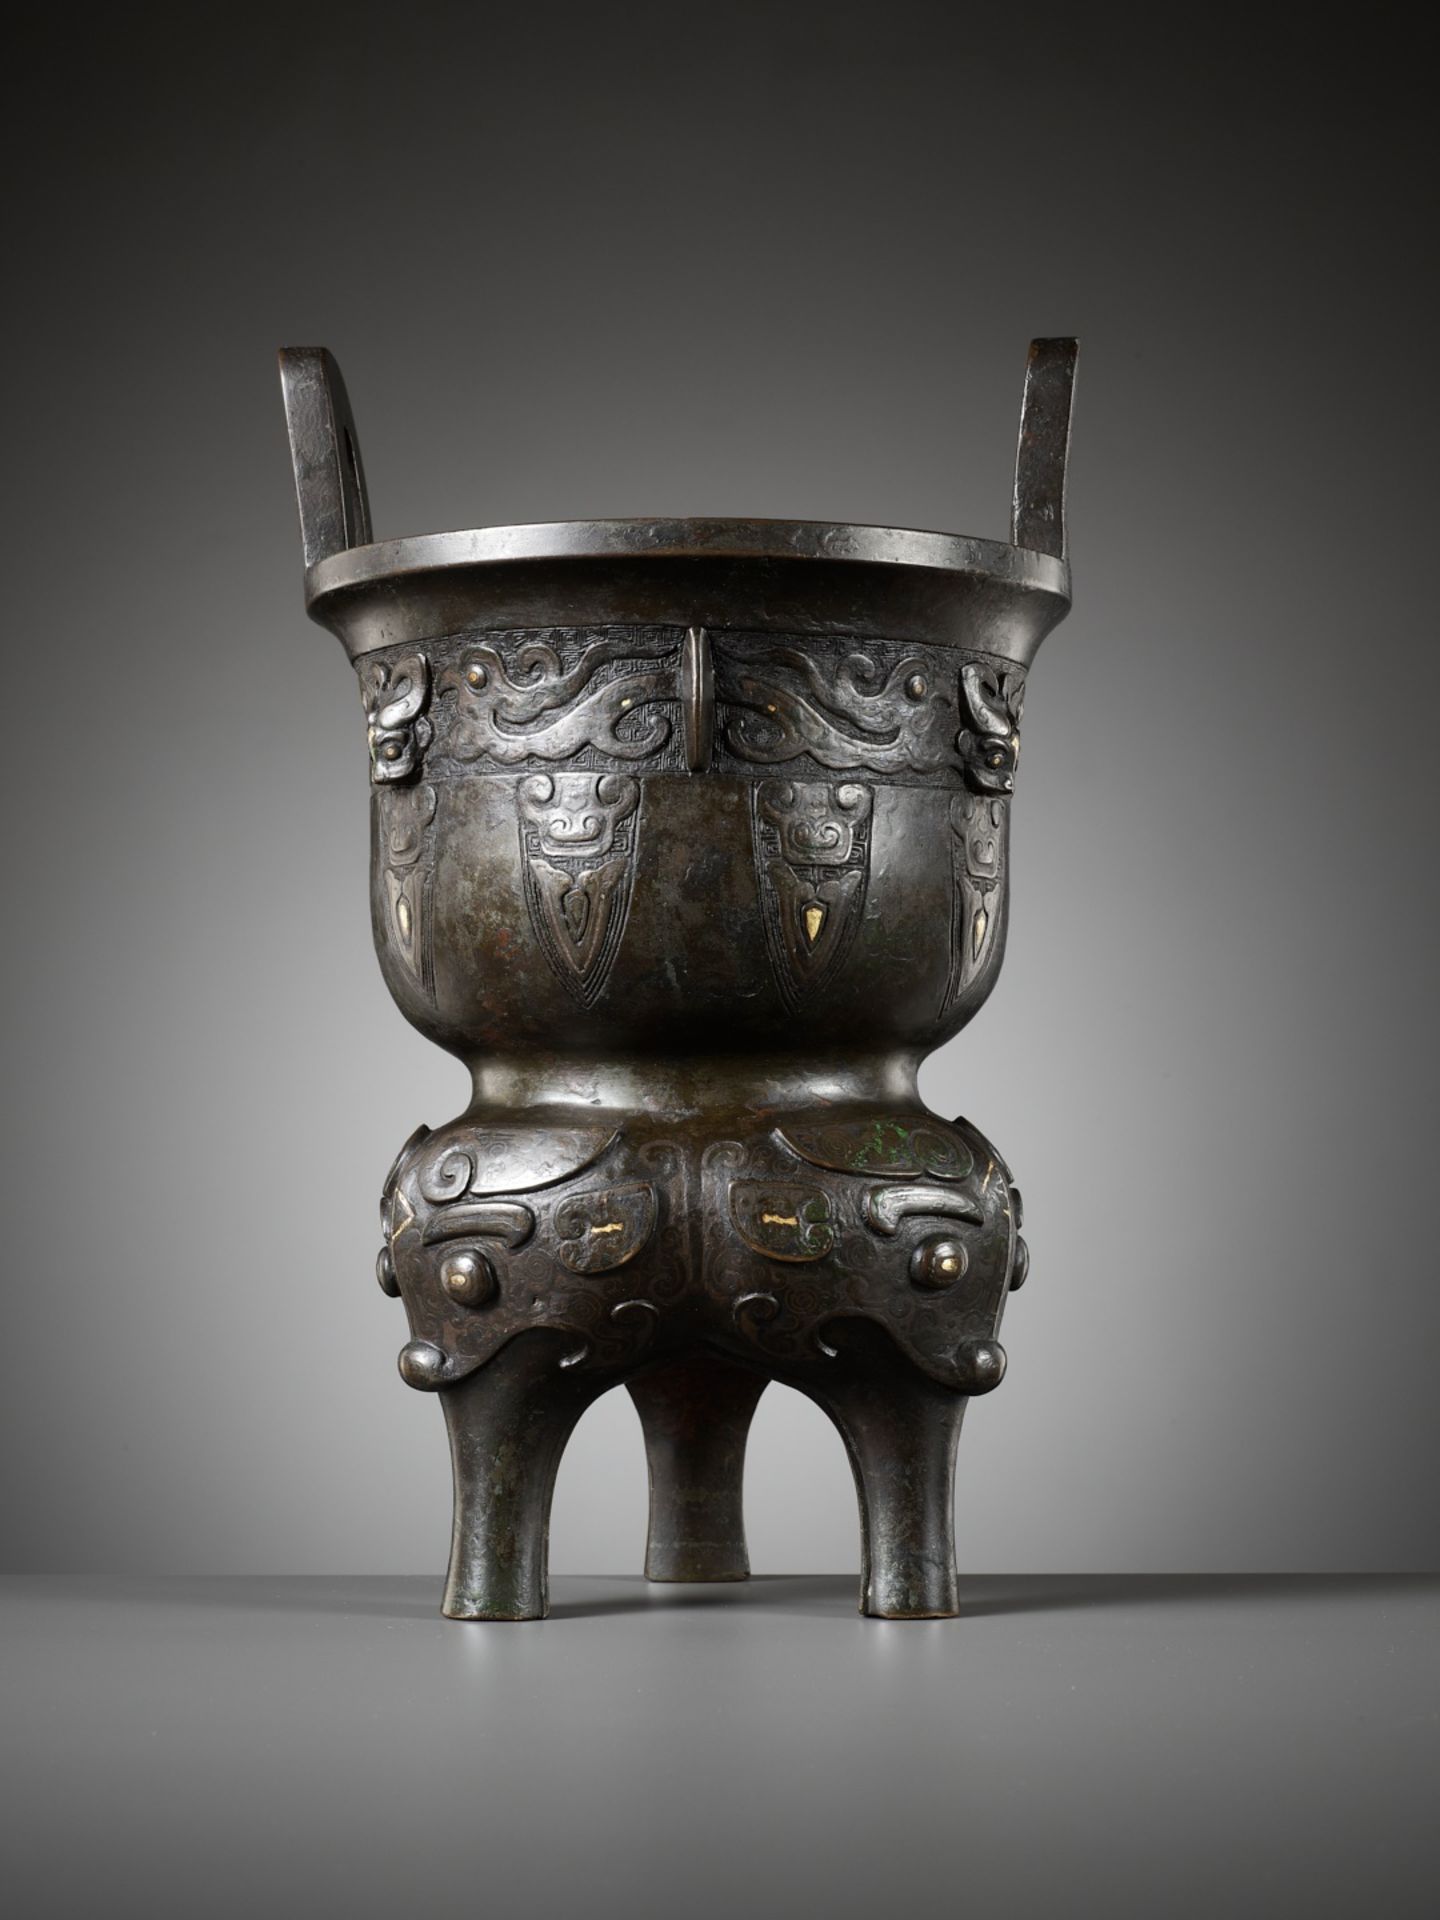 A GOLD AND SILVER-INLAID BRONZE ARCHAISTIC STEAMER, SONG TO MING DYNASTY - Image 13 of 24